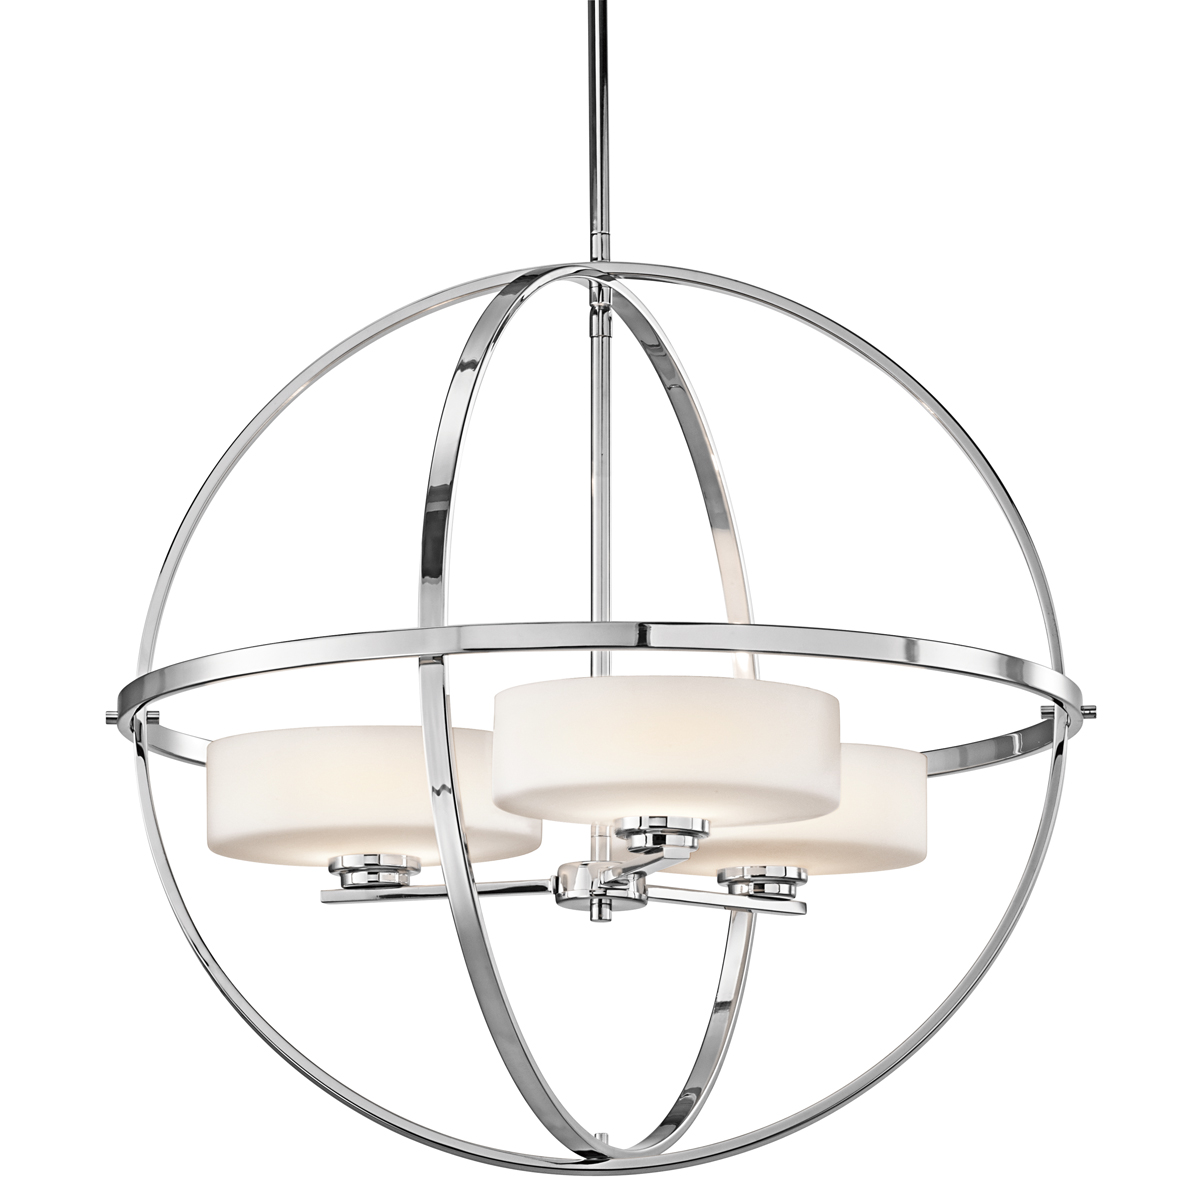 Kichler’s Olsay collection incorporates the trend for circular accents, which were so popular in the 1950s and 1960s.